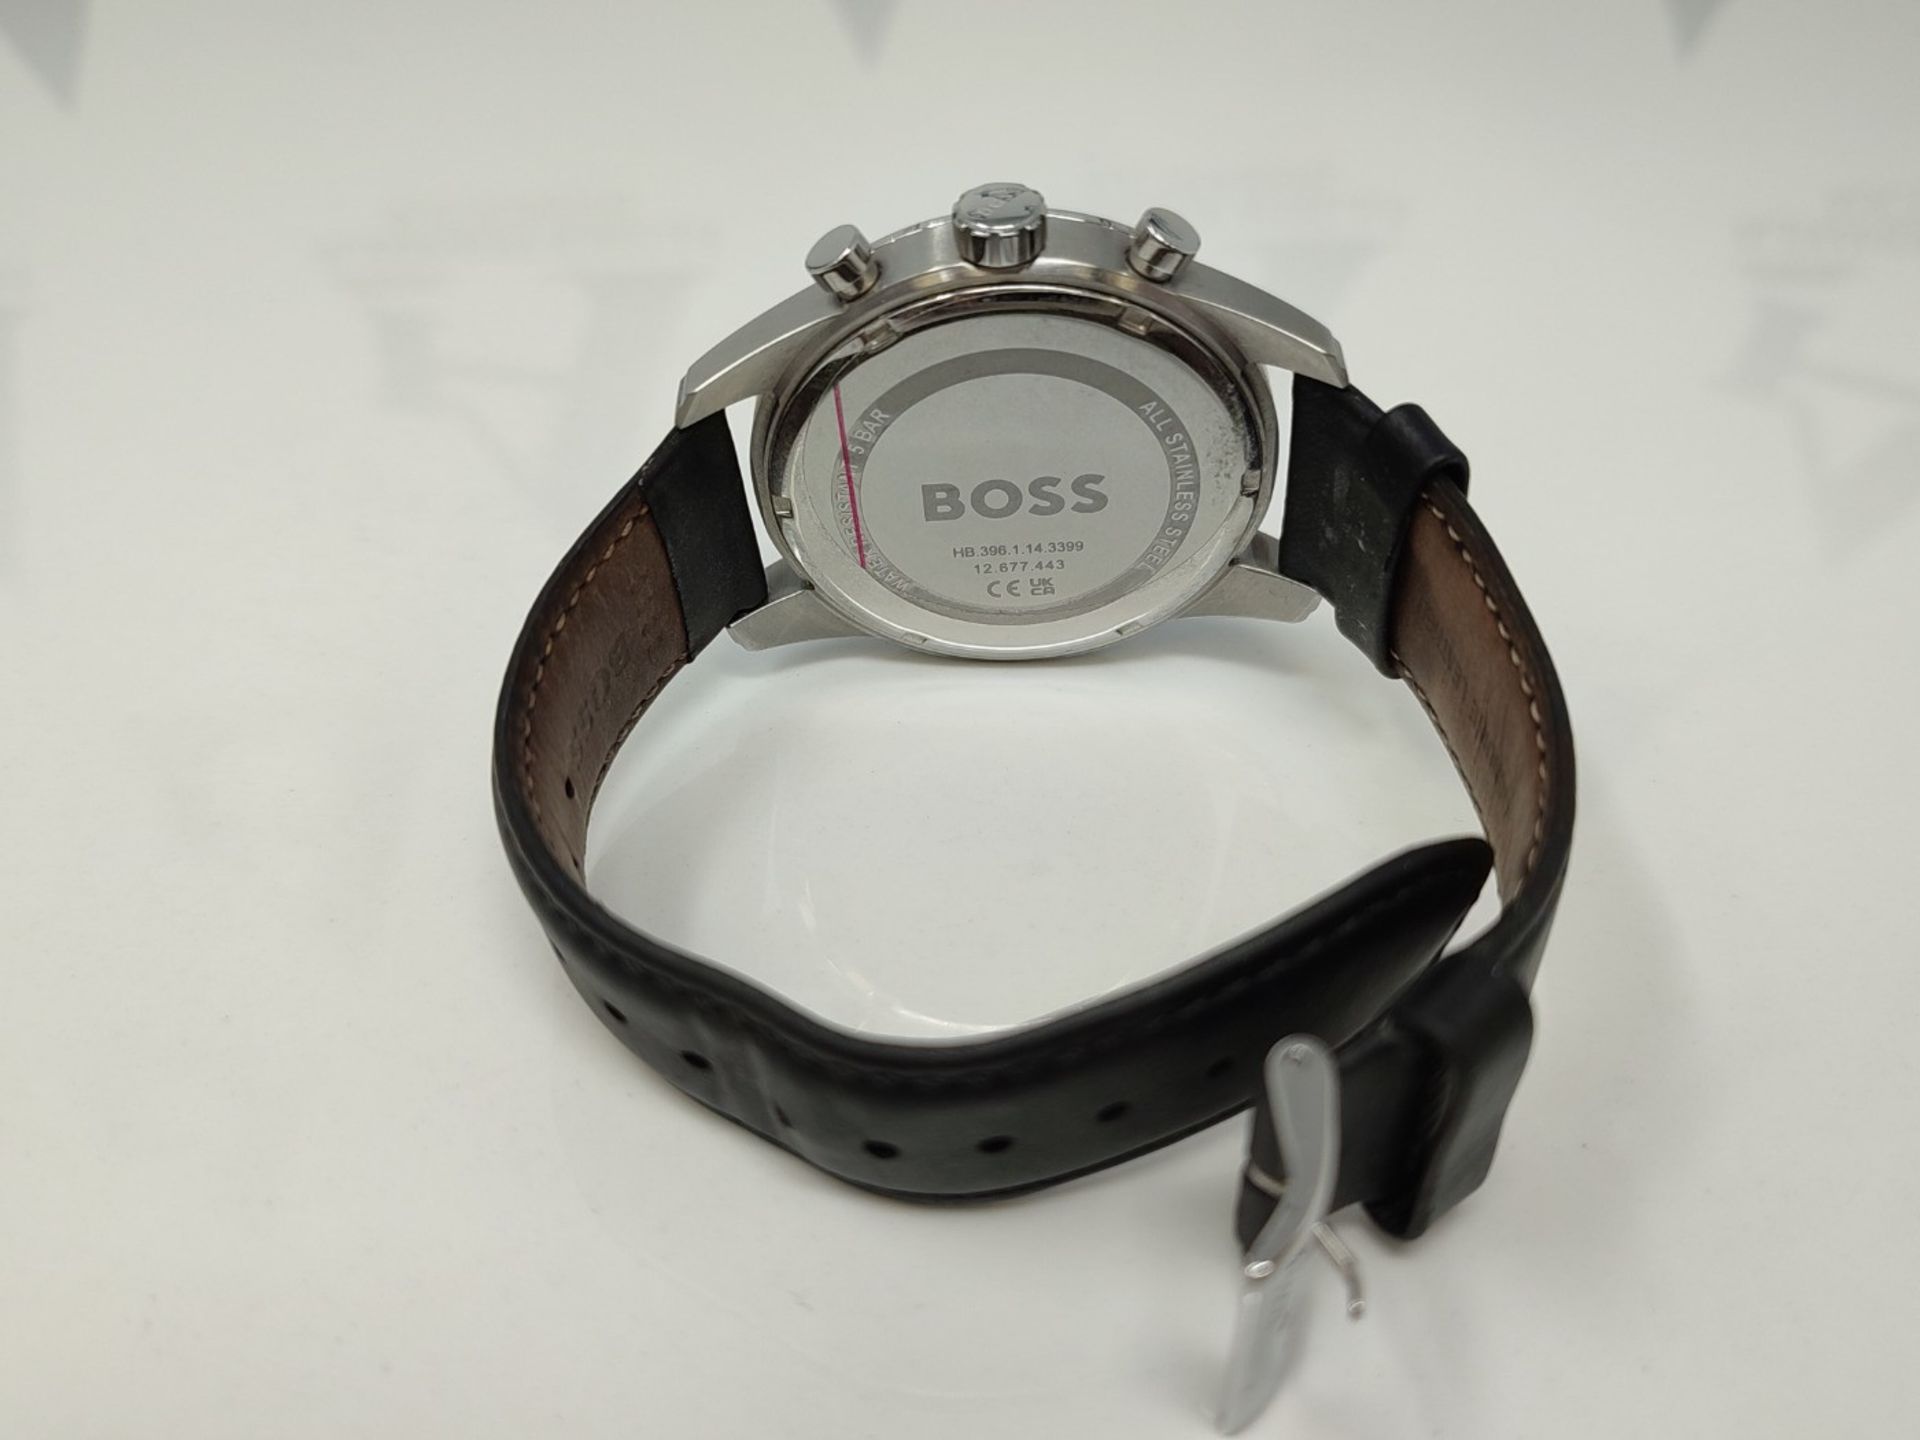 RRP £239.00 BOSS Chronograph Quartz Watch for Men with Black Leather Strap - 1513782 - Image 3 of 6